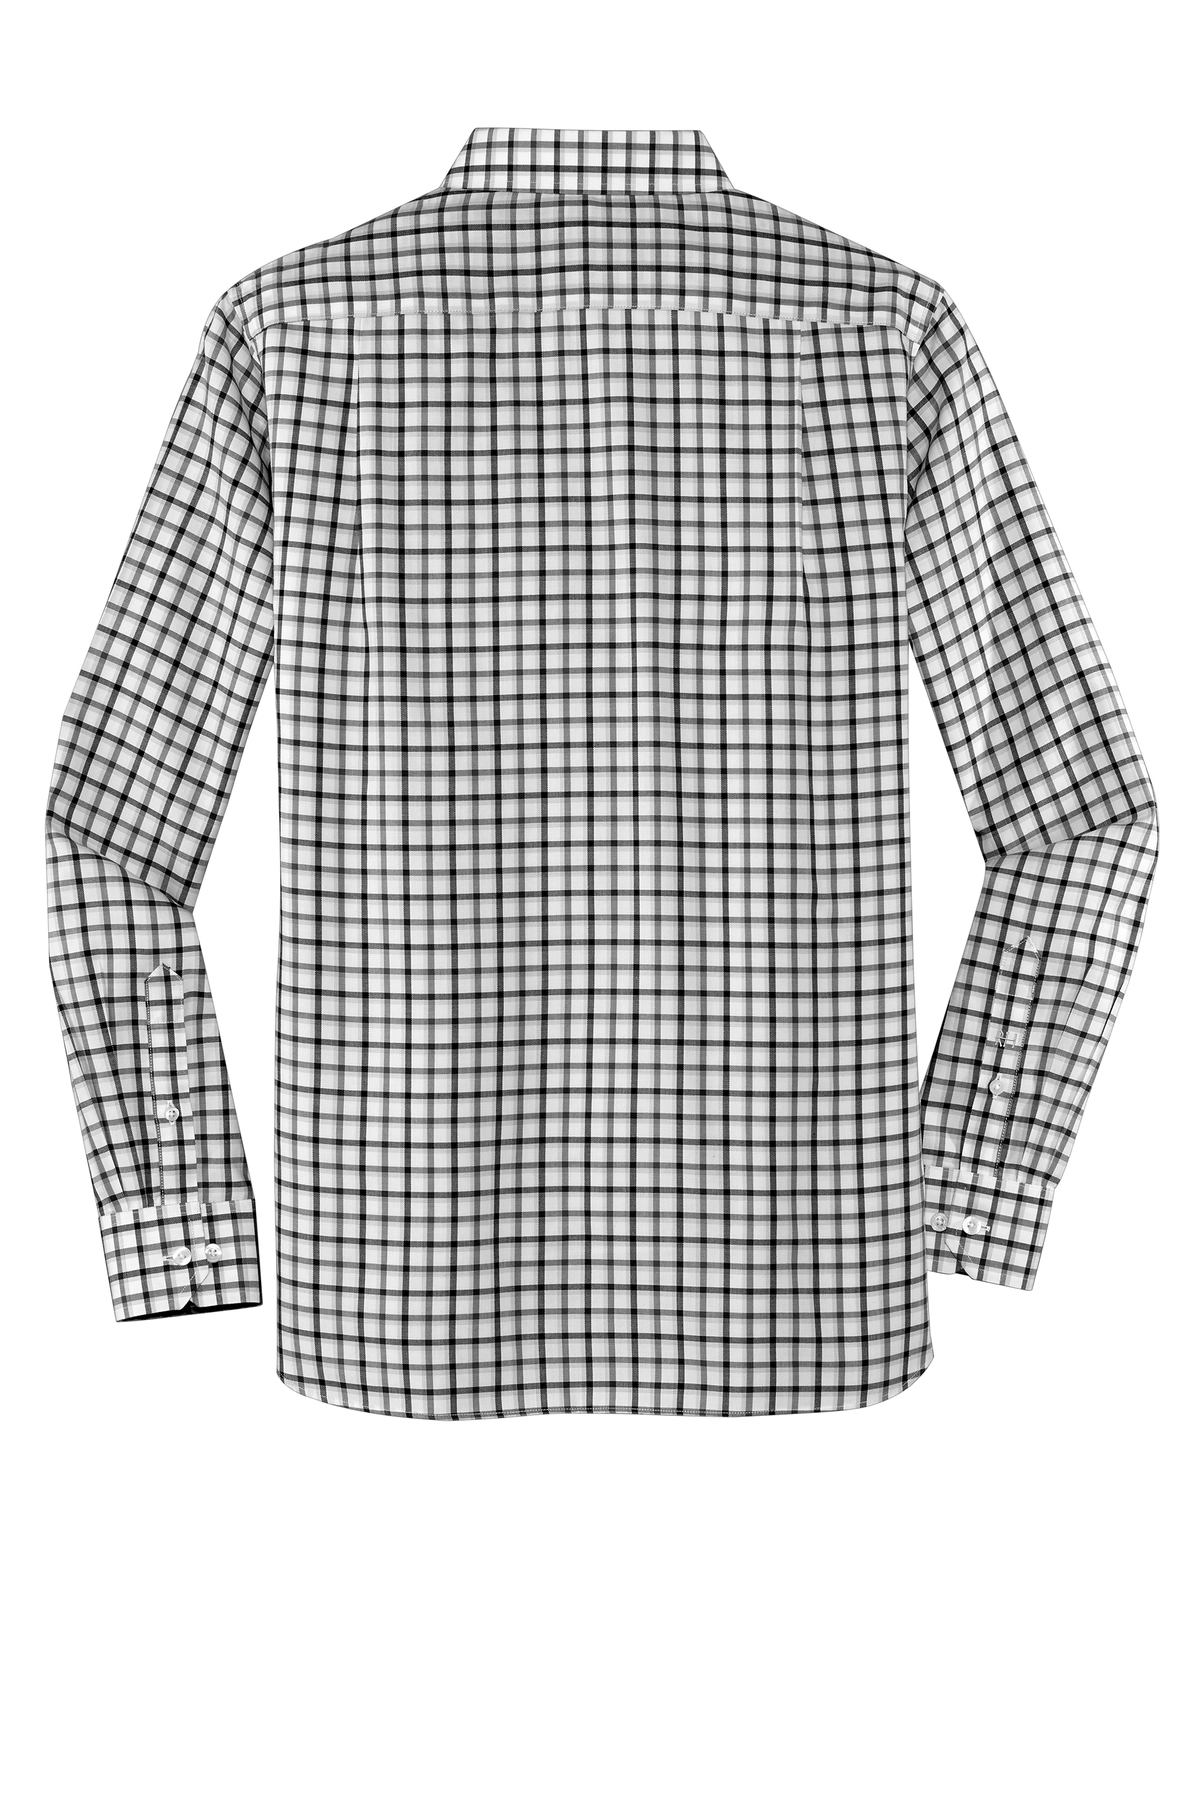 Red House Tricolor Check Slim Fit Non-Iron Shirt | Product | SanMar